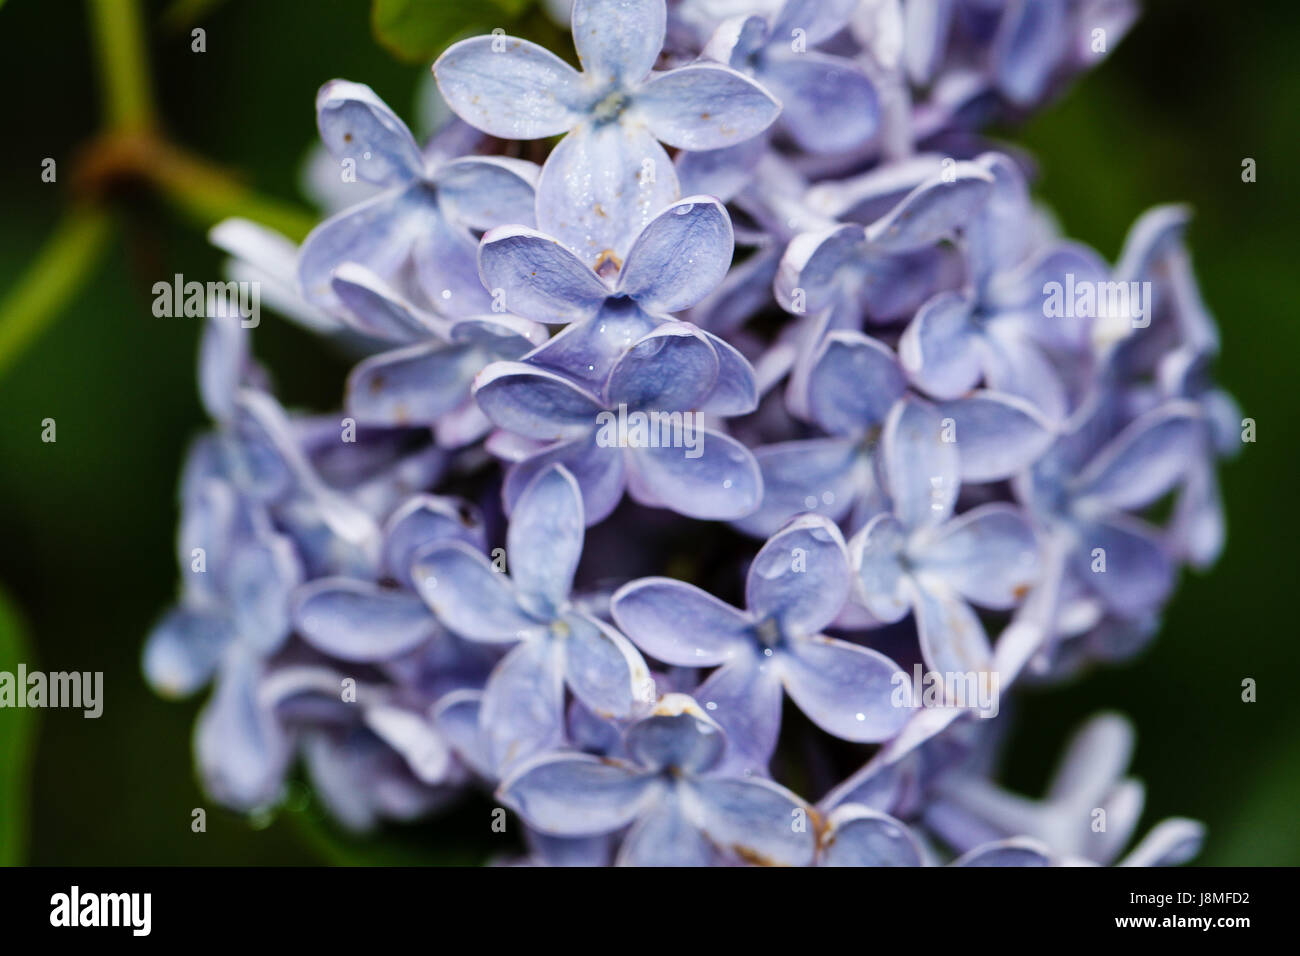 Syringa vulgaris, closeup.  Pale blue variety of lilac. Waxy petals resemble porcelain when wet with rain. Stock Photo